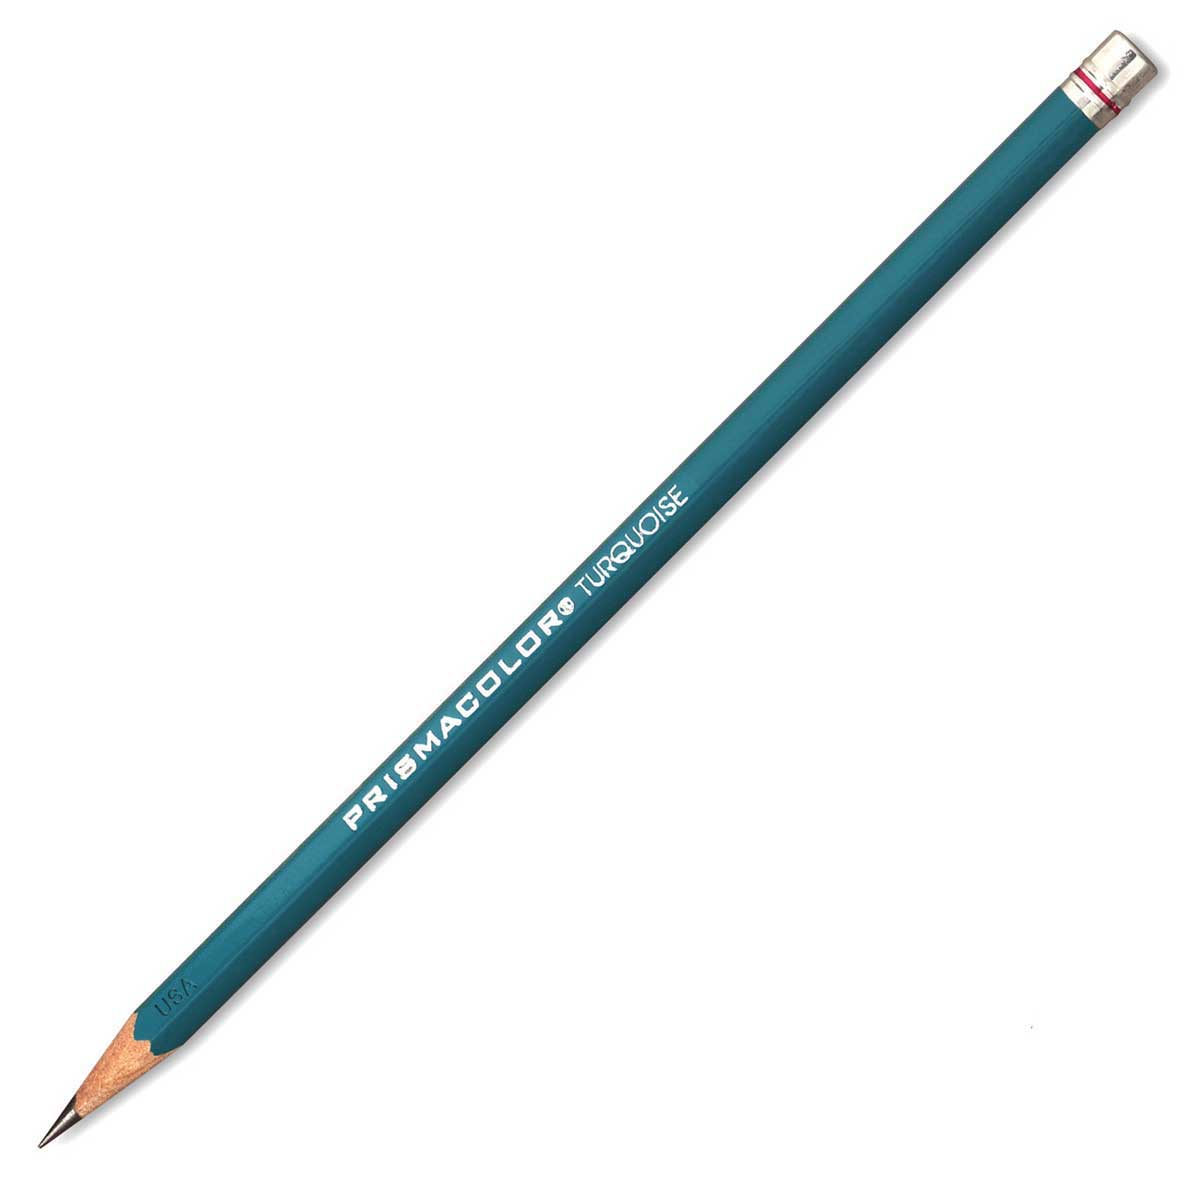 Prismacolor Turquoise Drawing Pencil - 5B